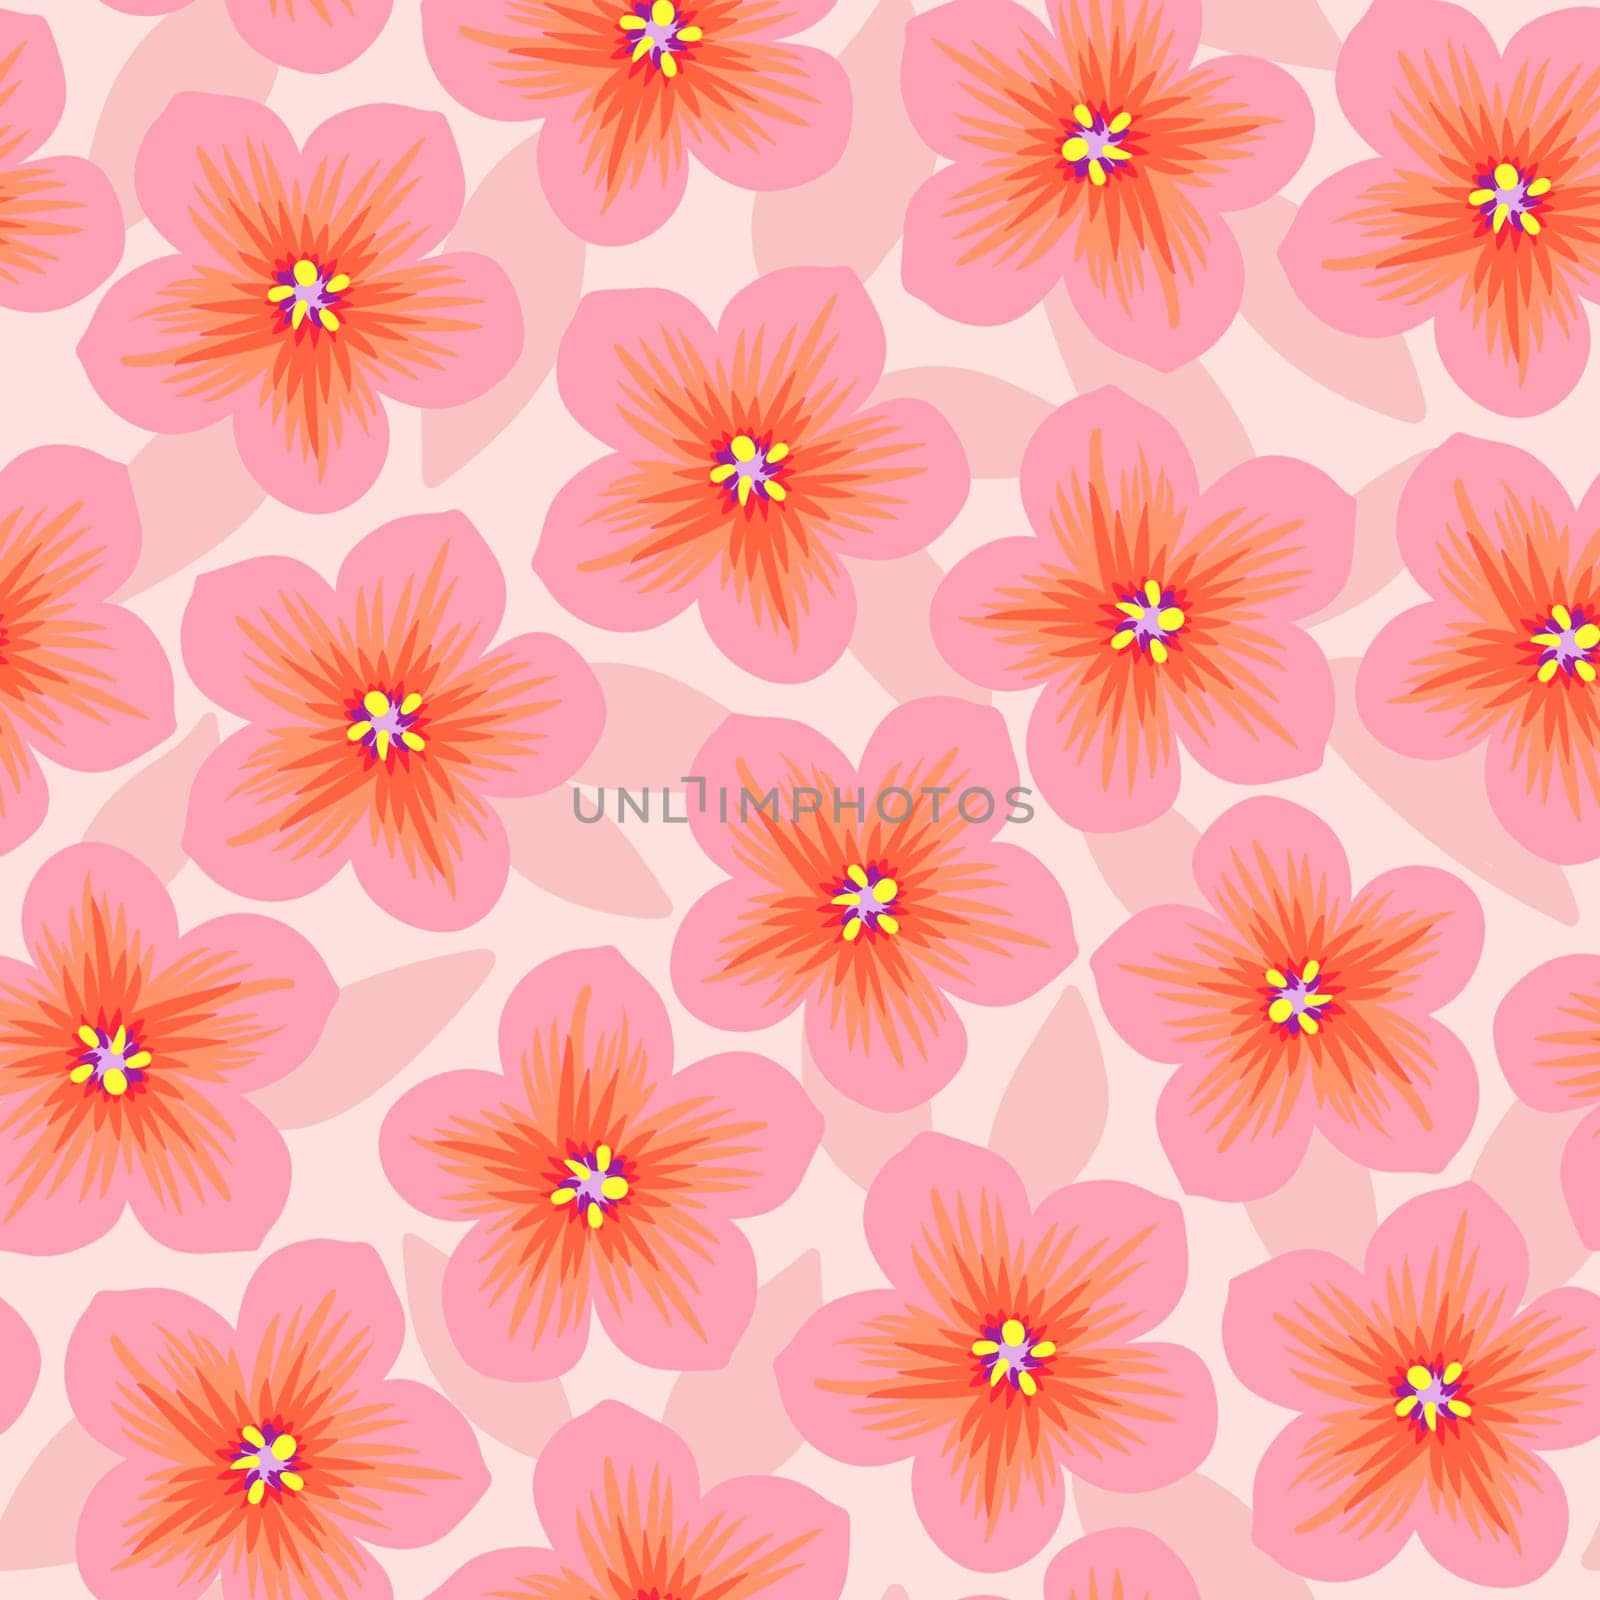 Hand drawn seamless pattern with floral flowers. Peach fuzz apricot orange ornament, simple retro pastel garden print with vintage ditsy elements. Color of the year design, trendy fabric background.